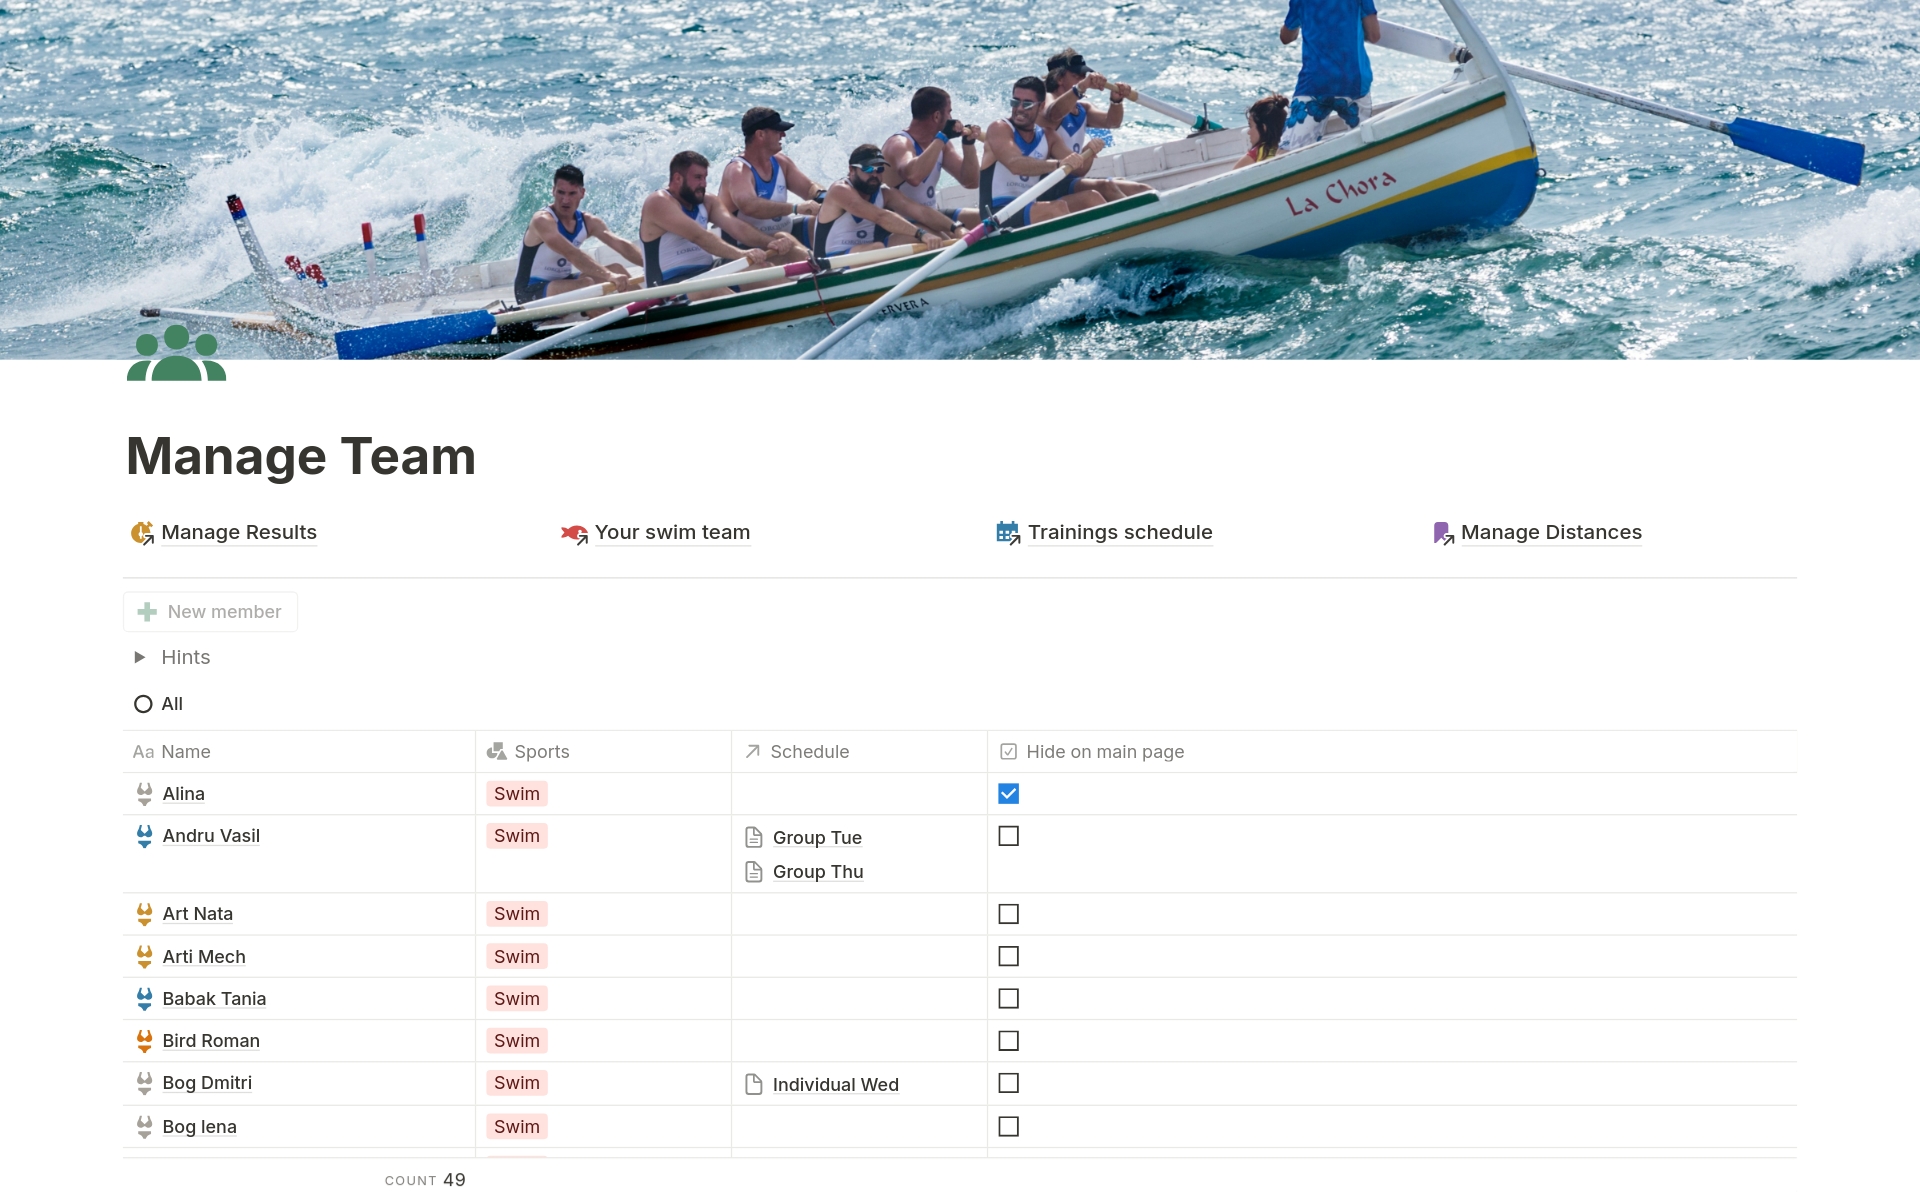 This tool is designed for swim trainers and sports team (family teams) managers. Features:
- Stores and shares all training results for each member.
- Stores and shares regular training schedules and attendances.
- Automatically calculates pace per 100m.